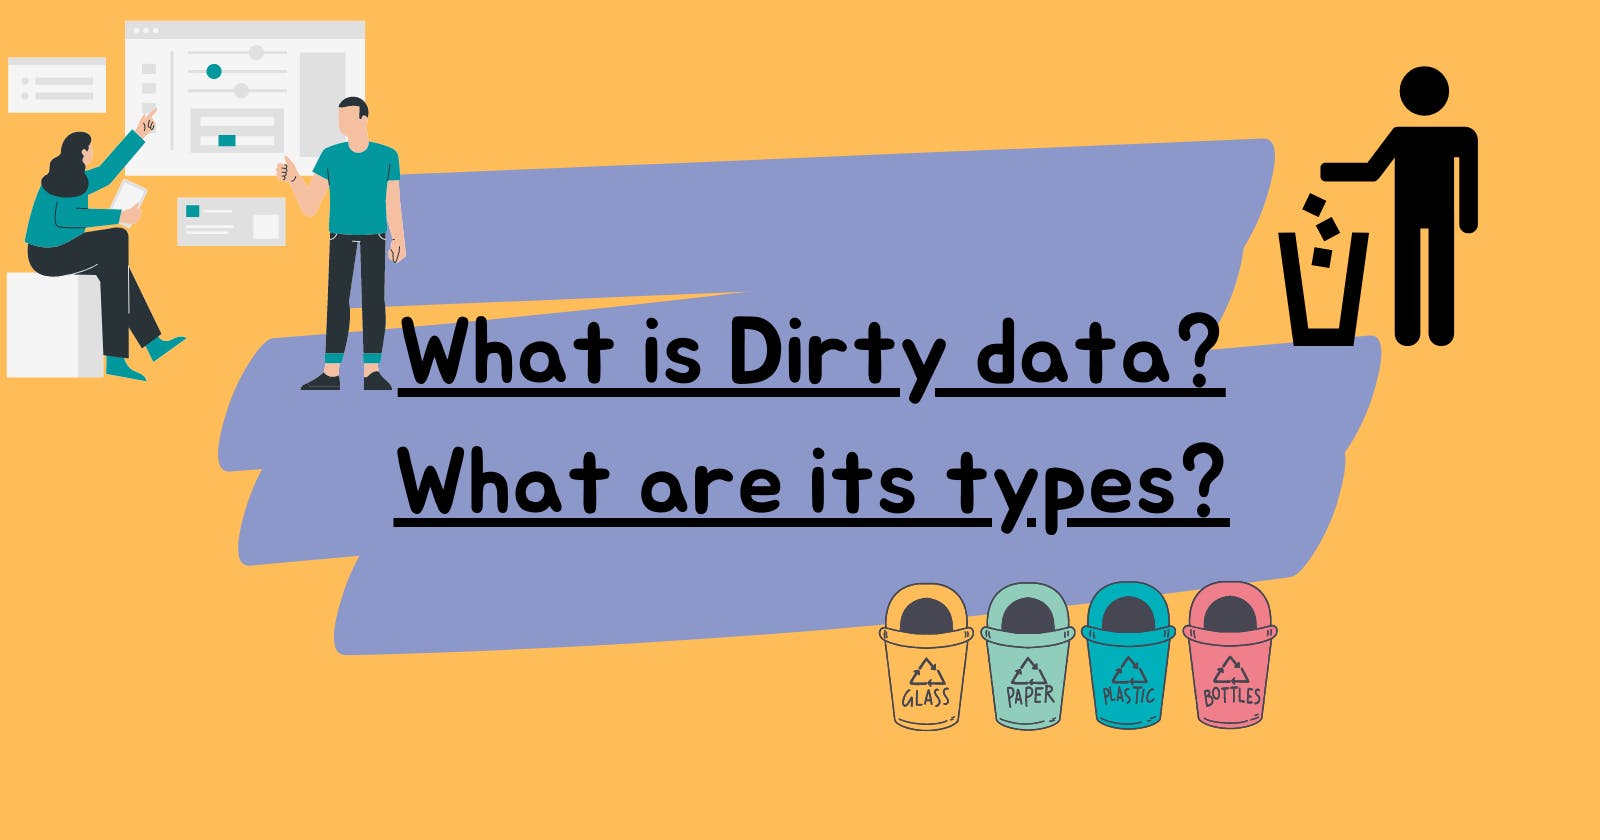 What is dirty data? what are its types?